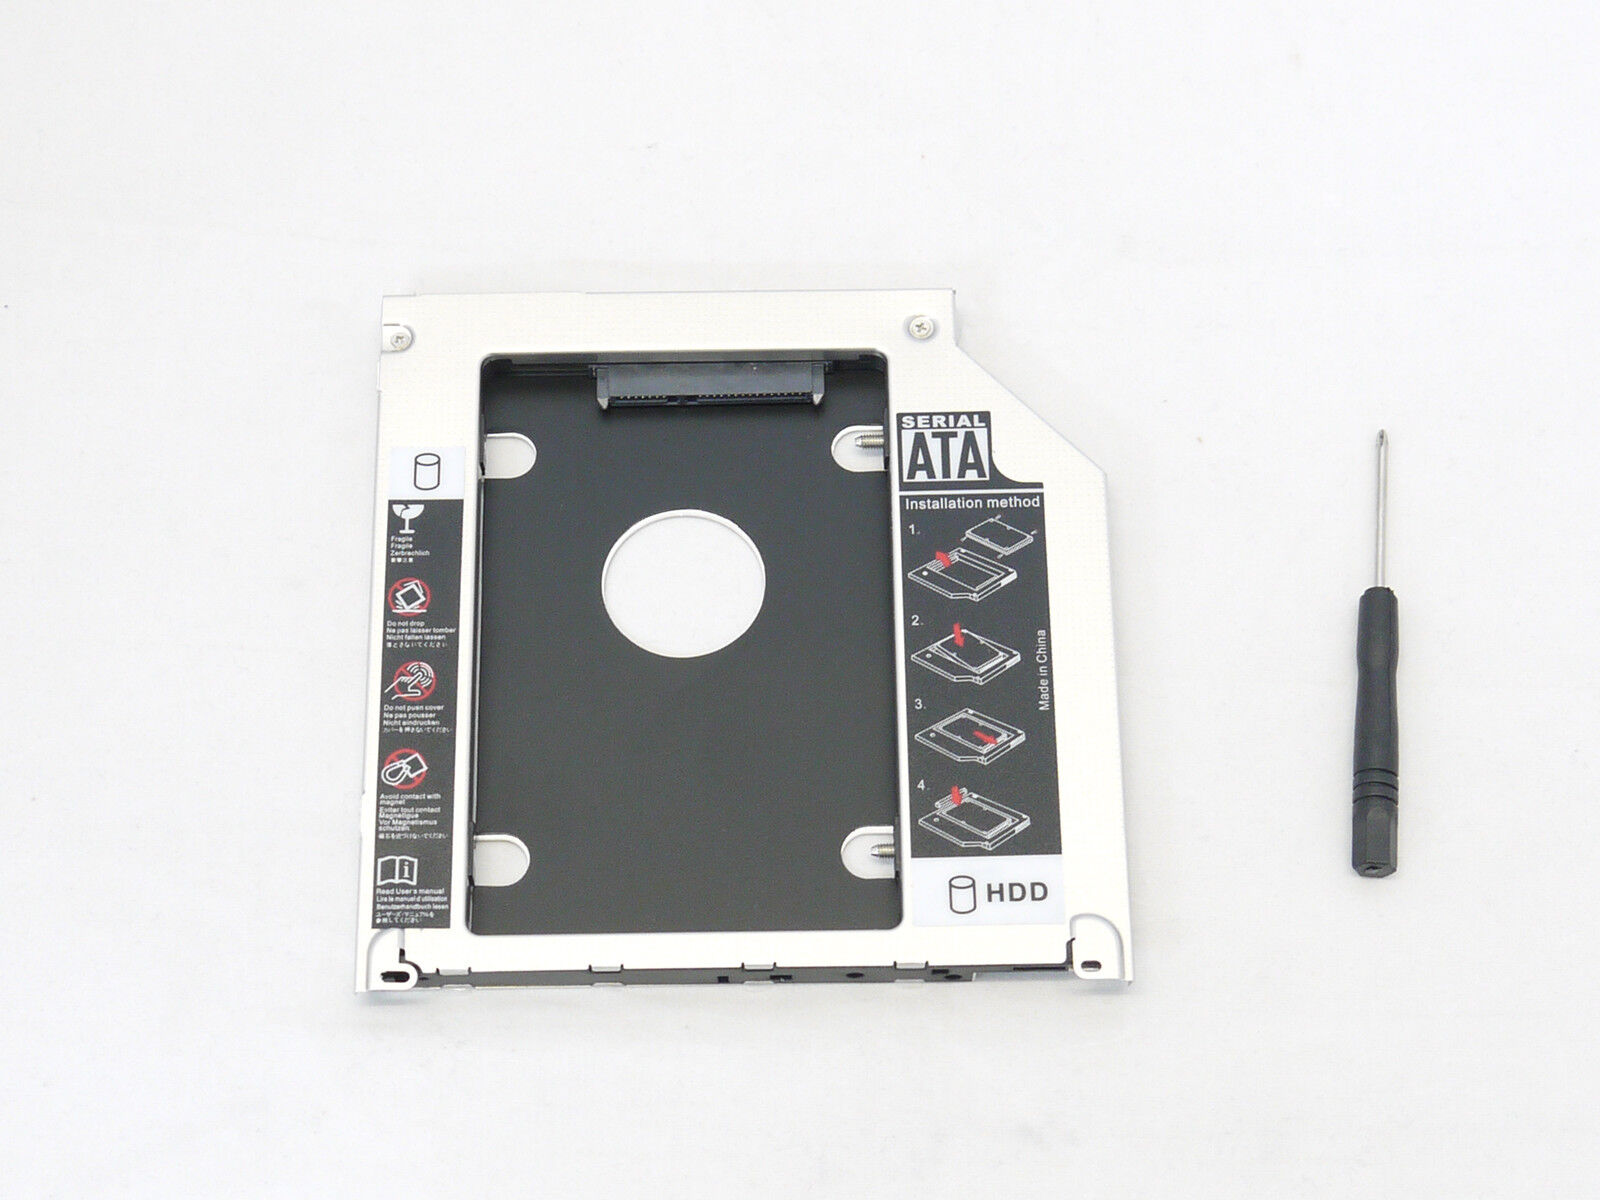 SATA HDD to ODD CD DVD RW BOX Caddy 9.5mm for Macbook Pro A1278 A1286 A1297